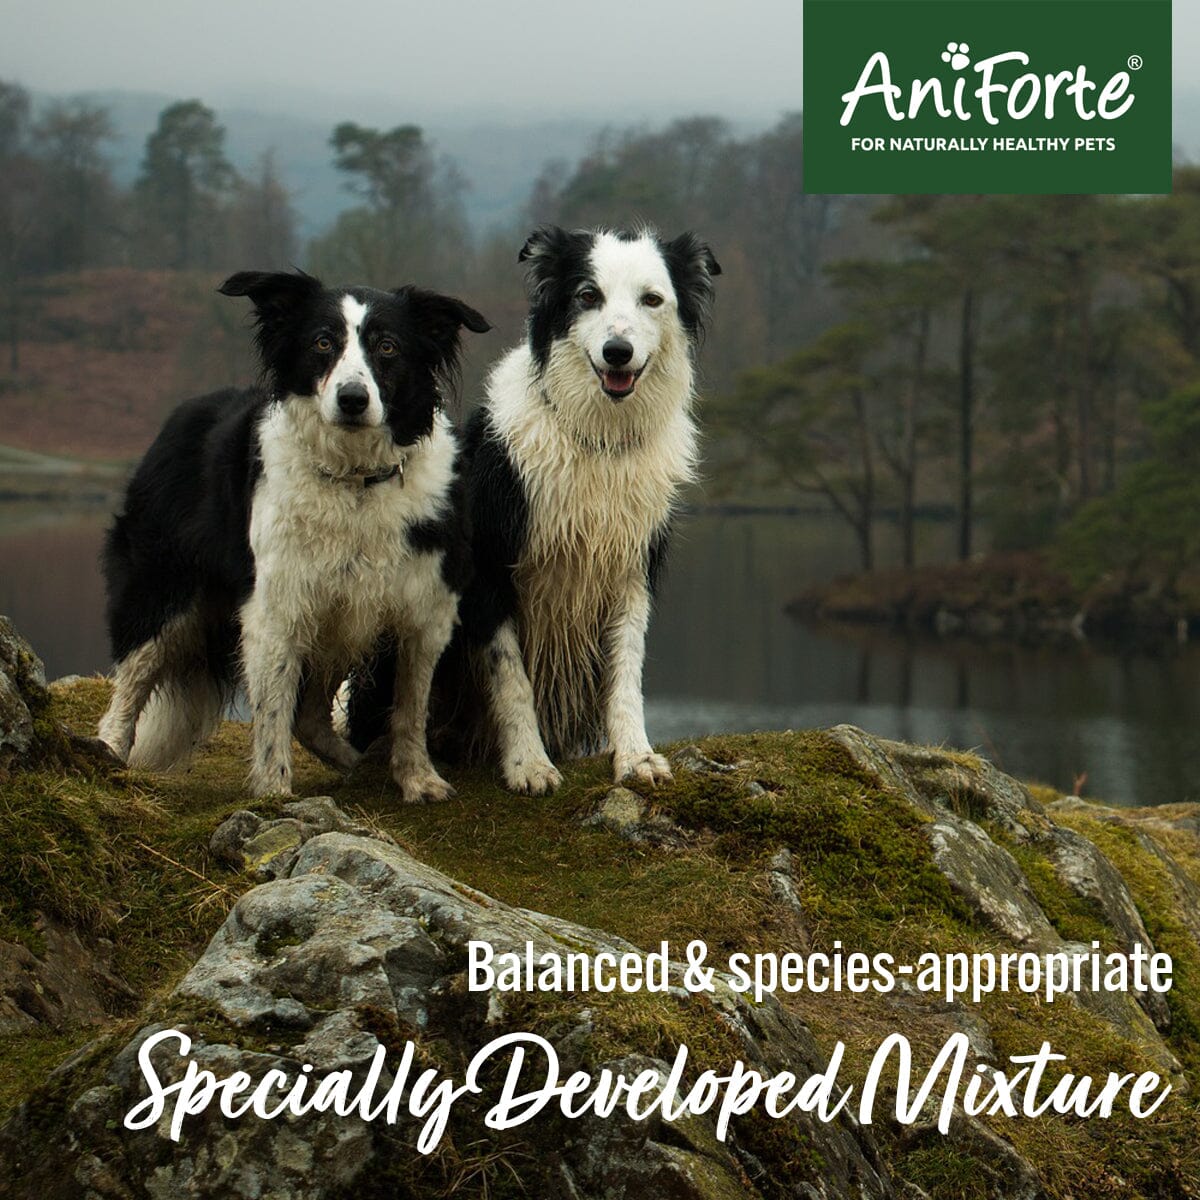 Raw Feeders Essentials - BARF Complete and Fruit and Vegetables with Herbs - AniForte UK